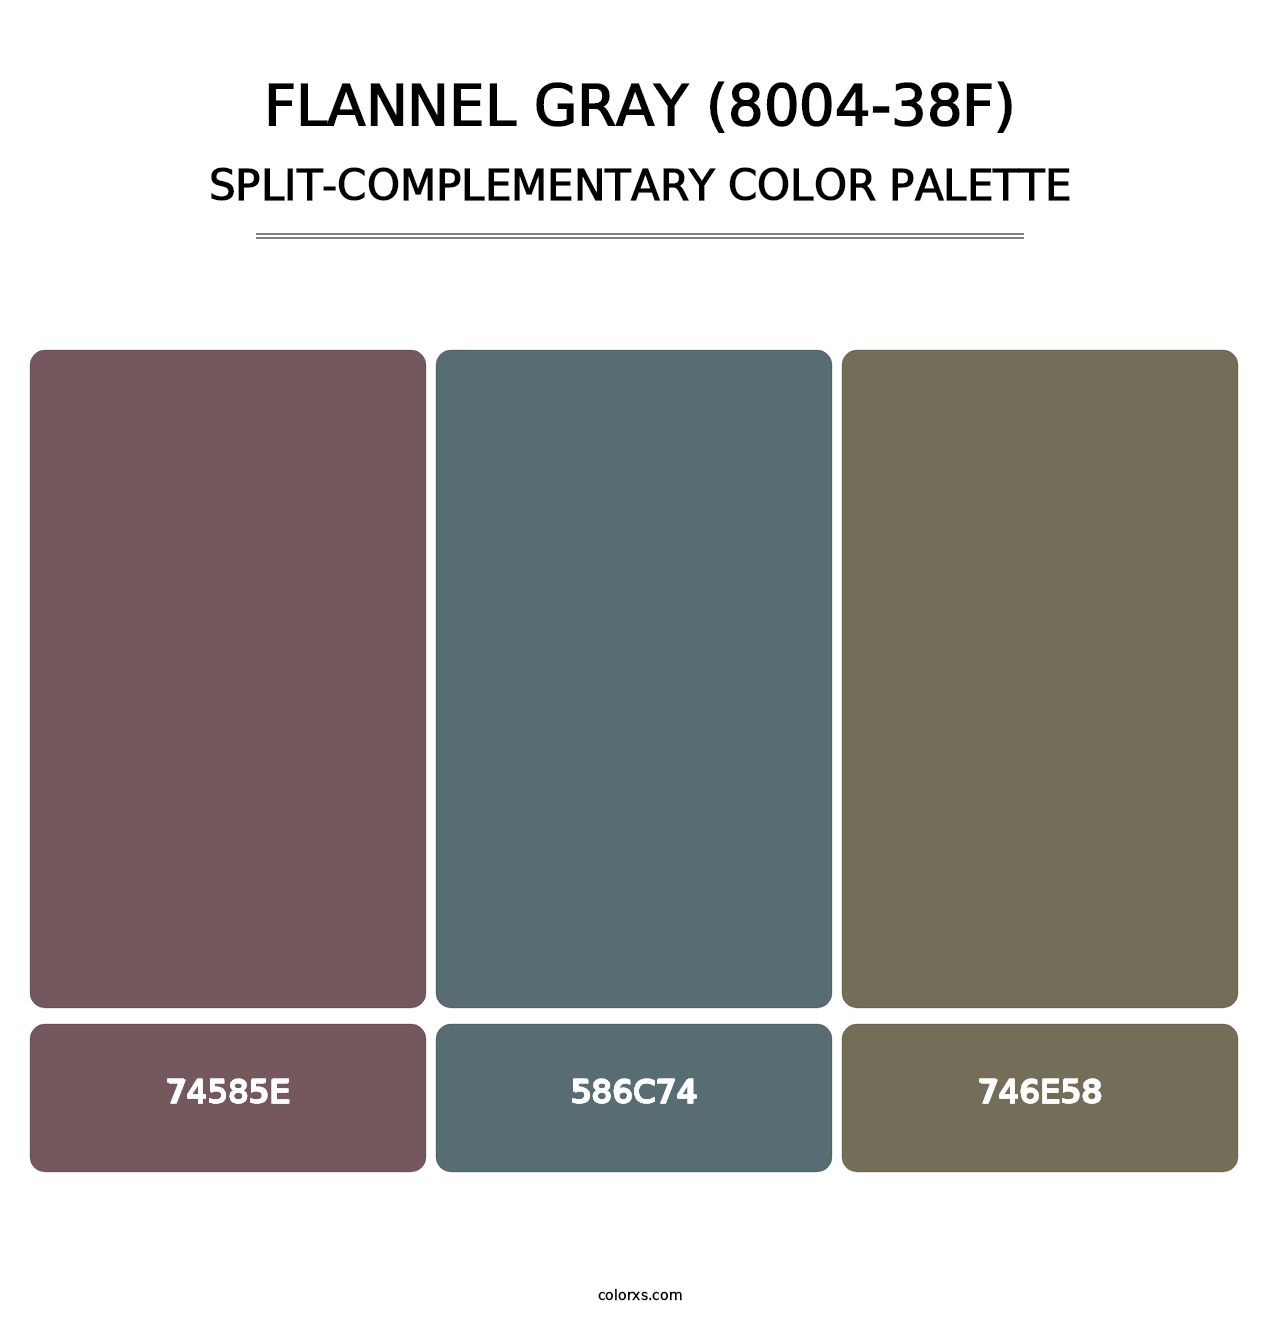 Flannel Gray (8004-38F) - Split-Complementary Color Palette